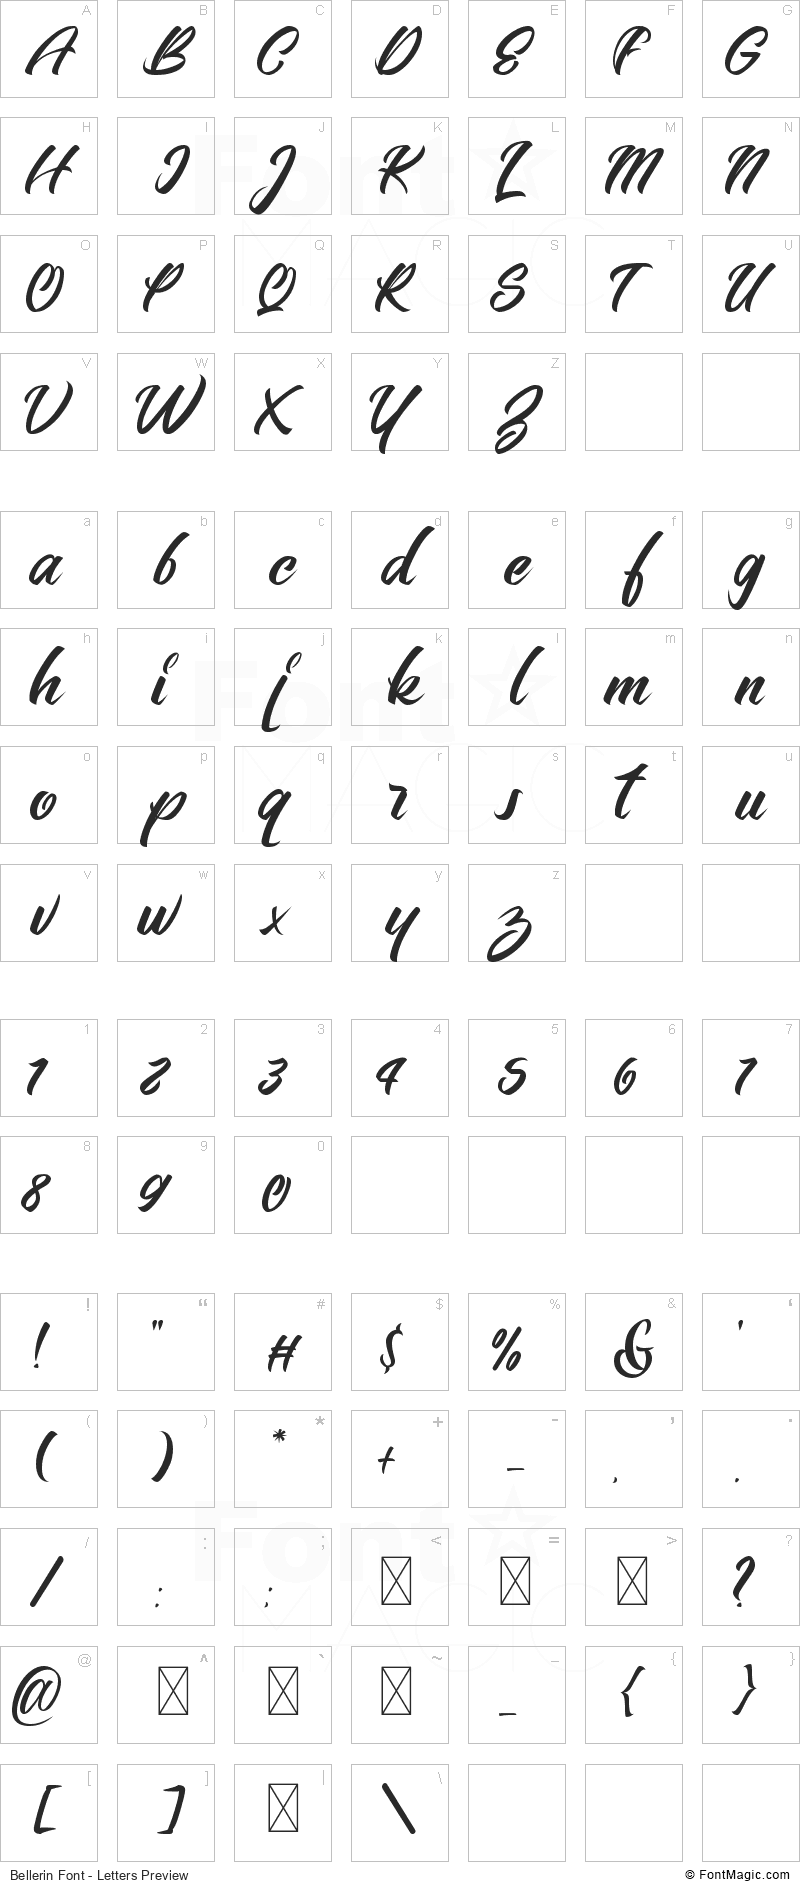 Bellerin Font - All Latters Preview Chart